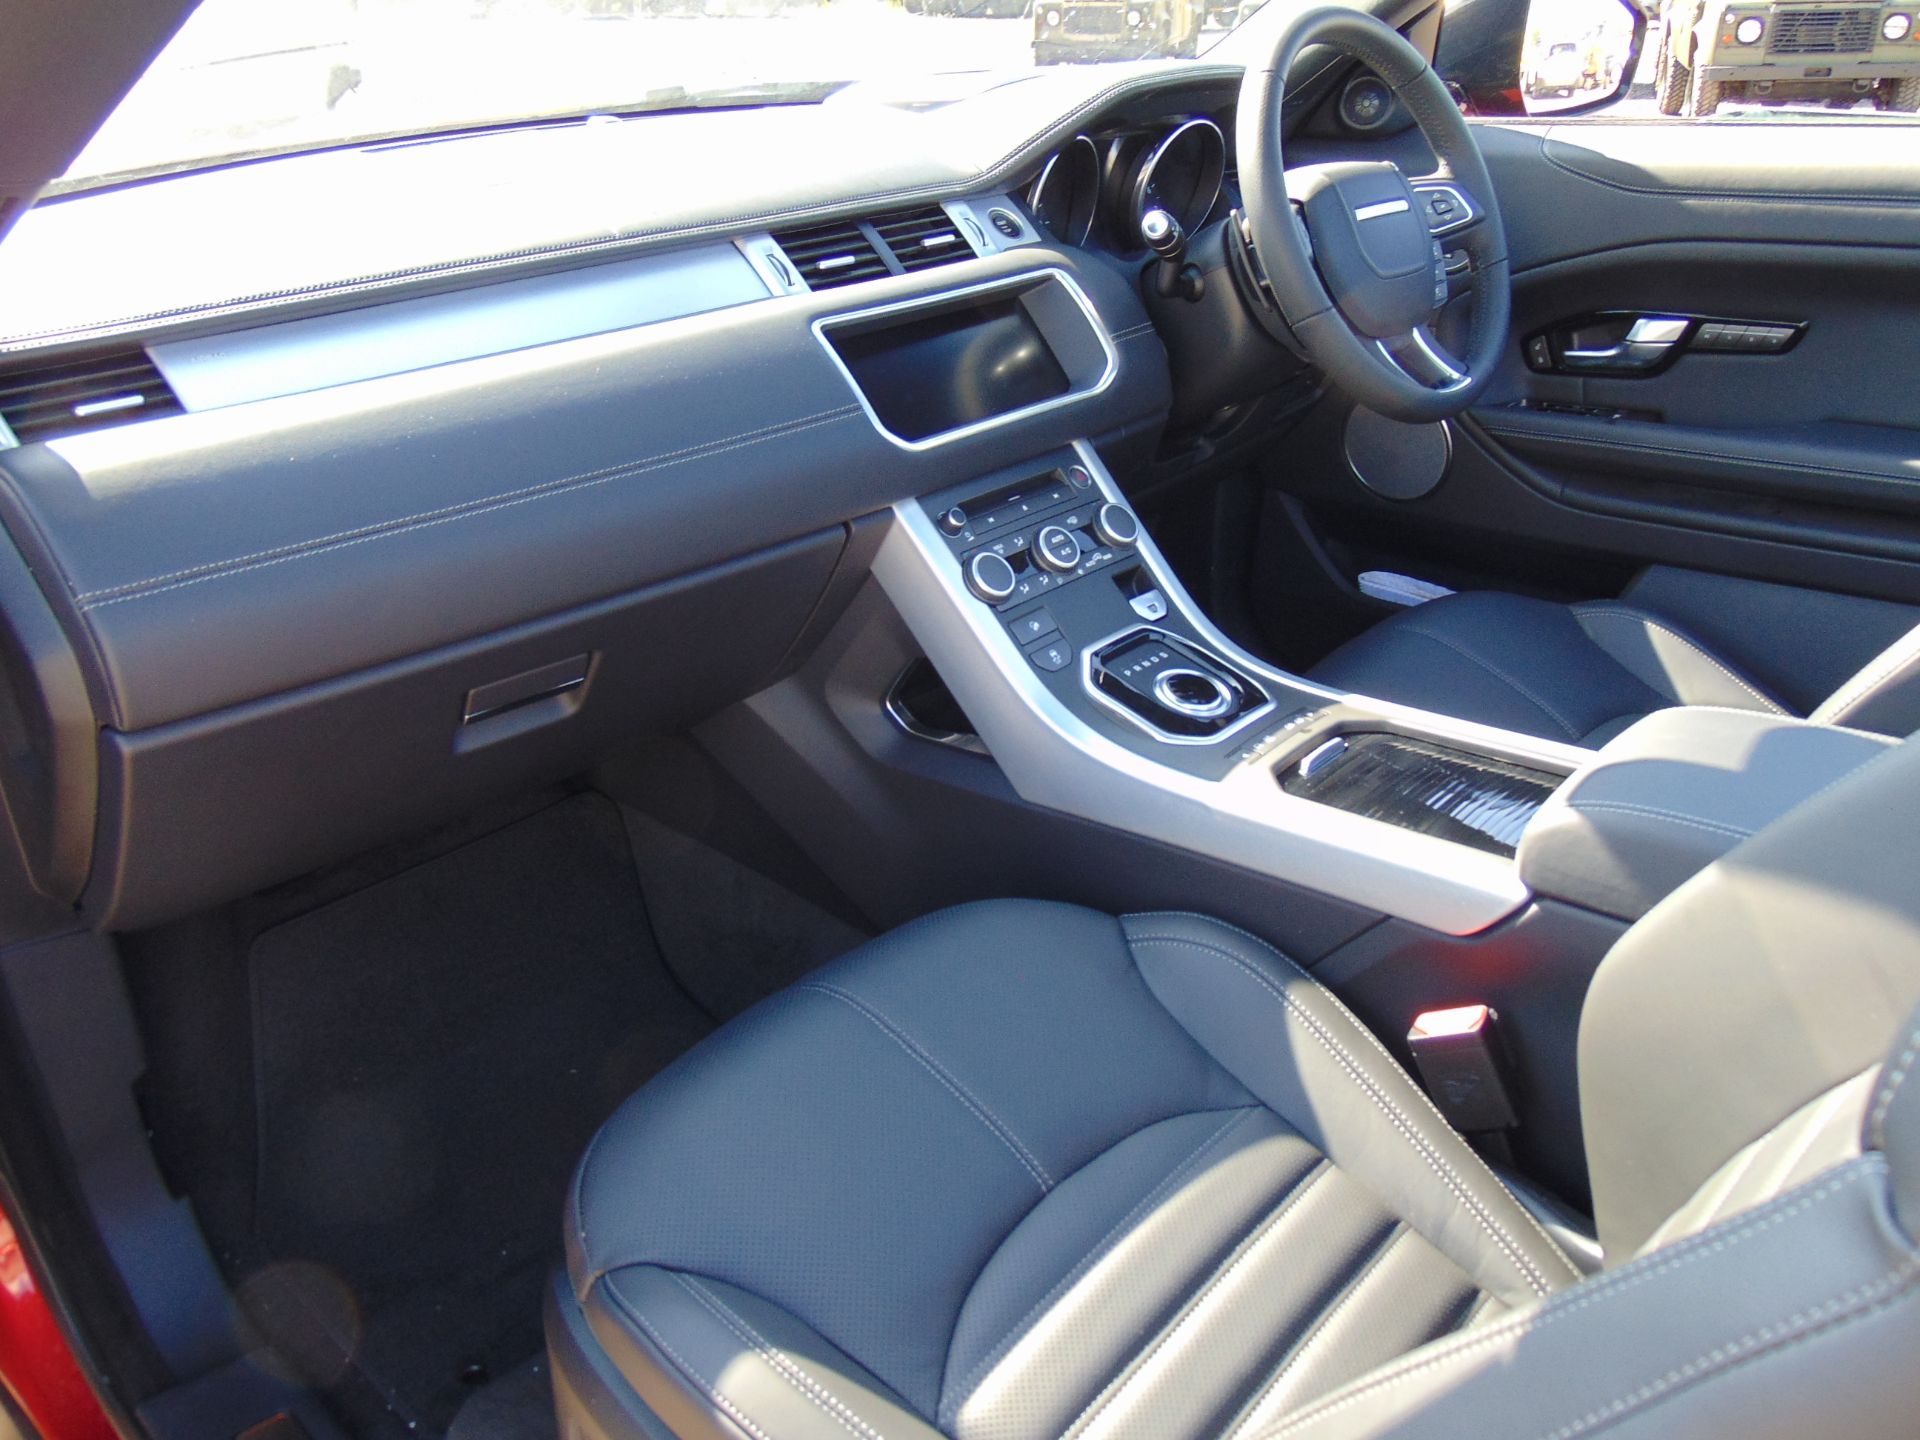 NEW UNUSED Range Rover Evoque 2.0 i4 HSE Dynamic Convertible - Image 33 of 39